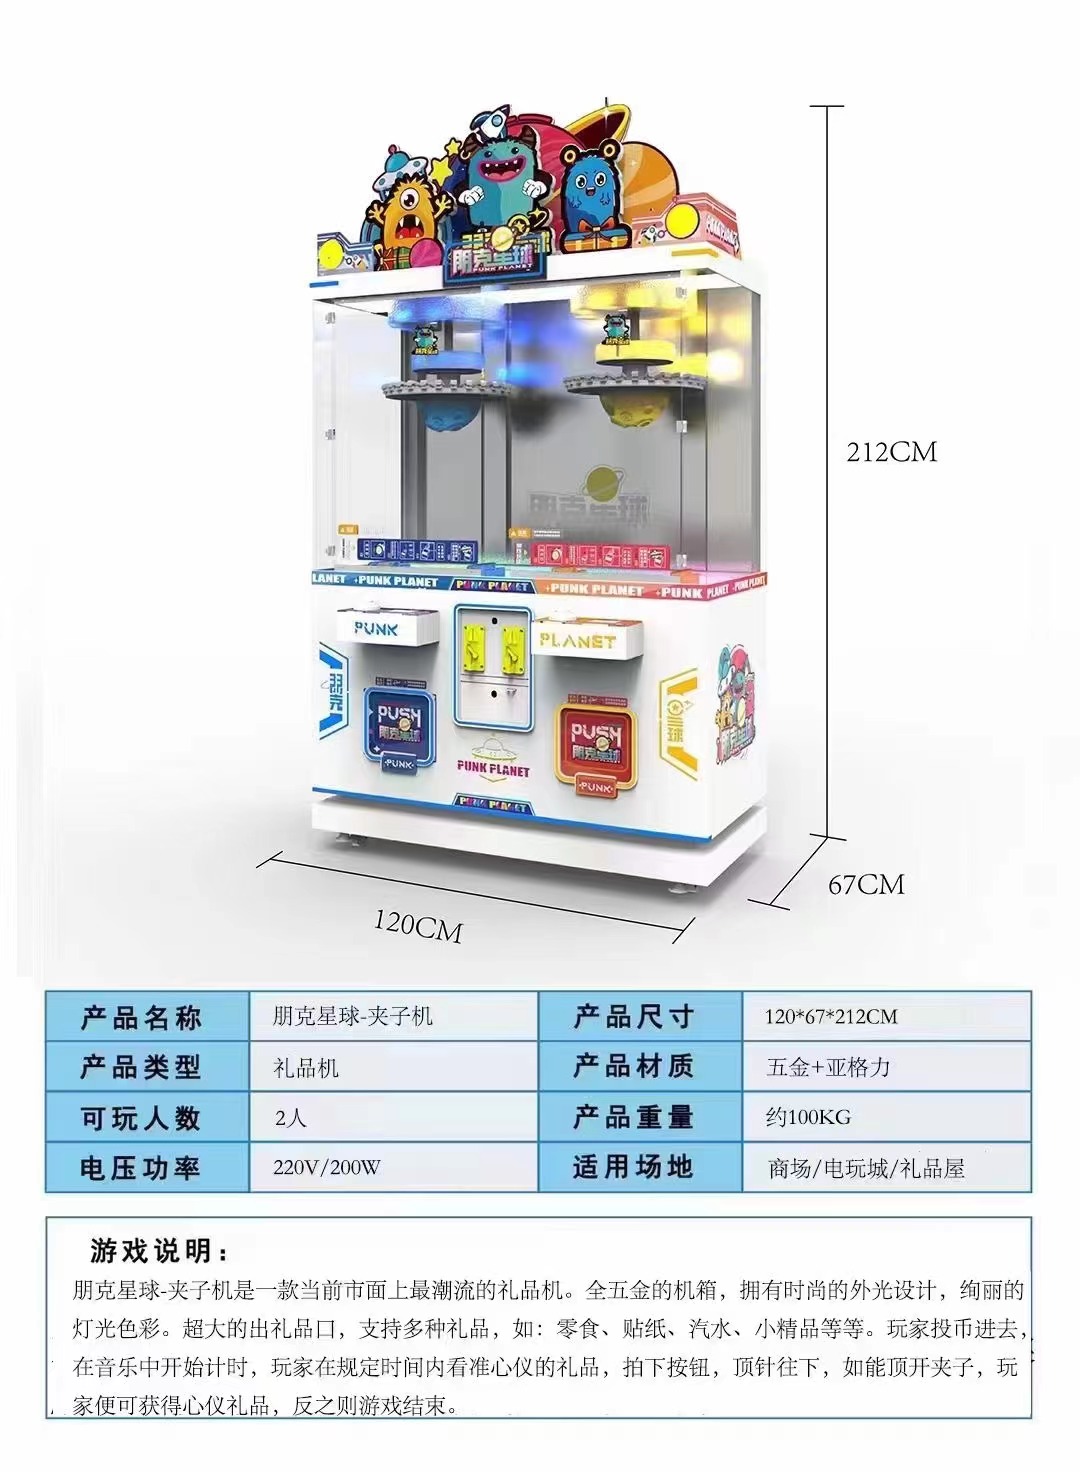 2023 New Pursuit Youth Clip Machine Coin, Snacks, Gifts, Games, Electromechanical Games, City Games, Amusement Machines, National Music